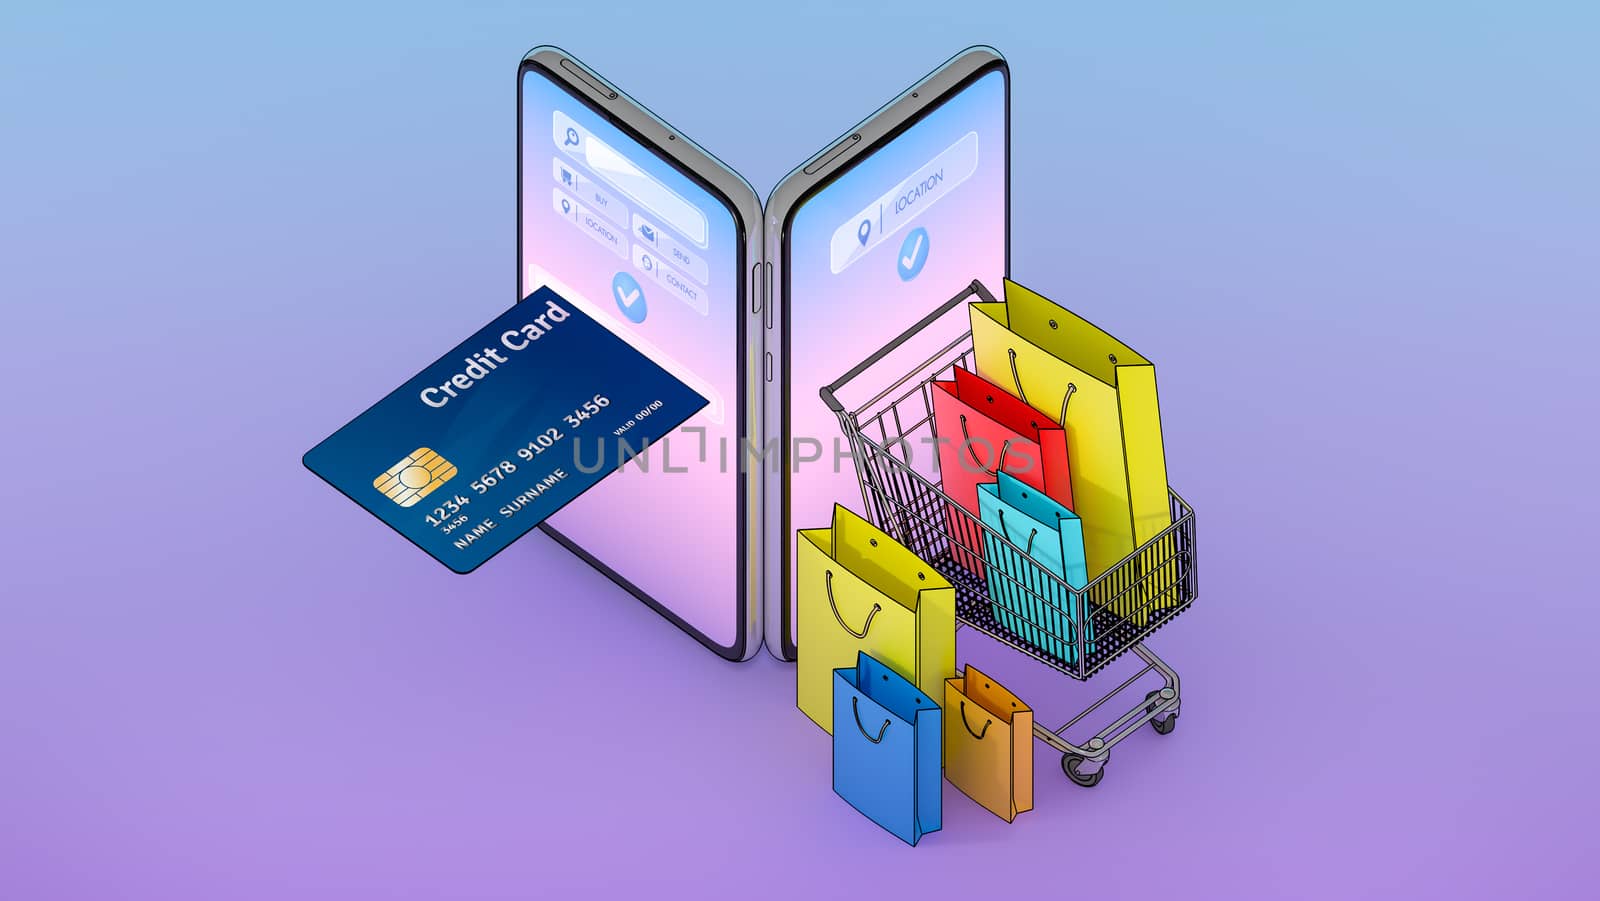 Many Shopping bag and price tag and credit card in a shopping cart appeared from smartphones screen., shopping online or shopaholic concept.,3d illustration with object clipping path.